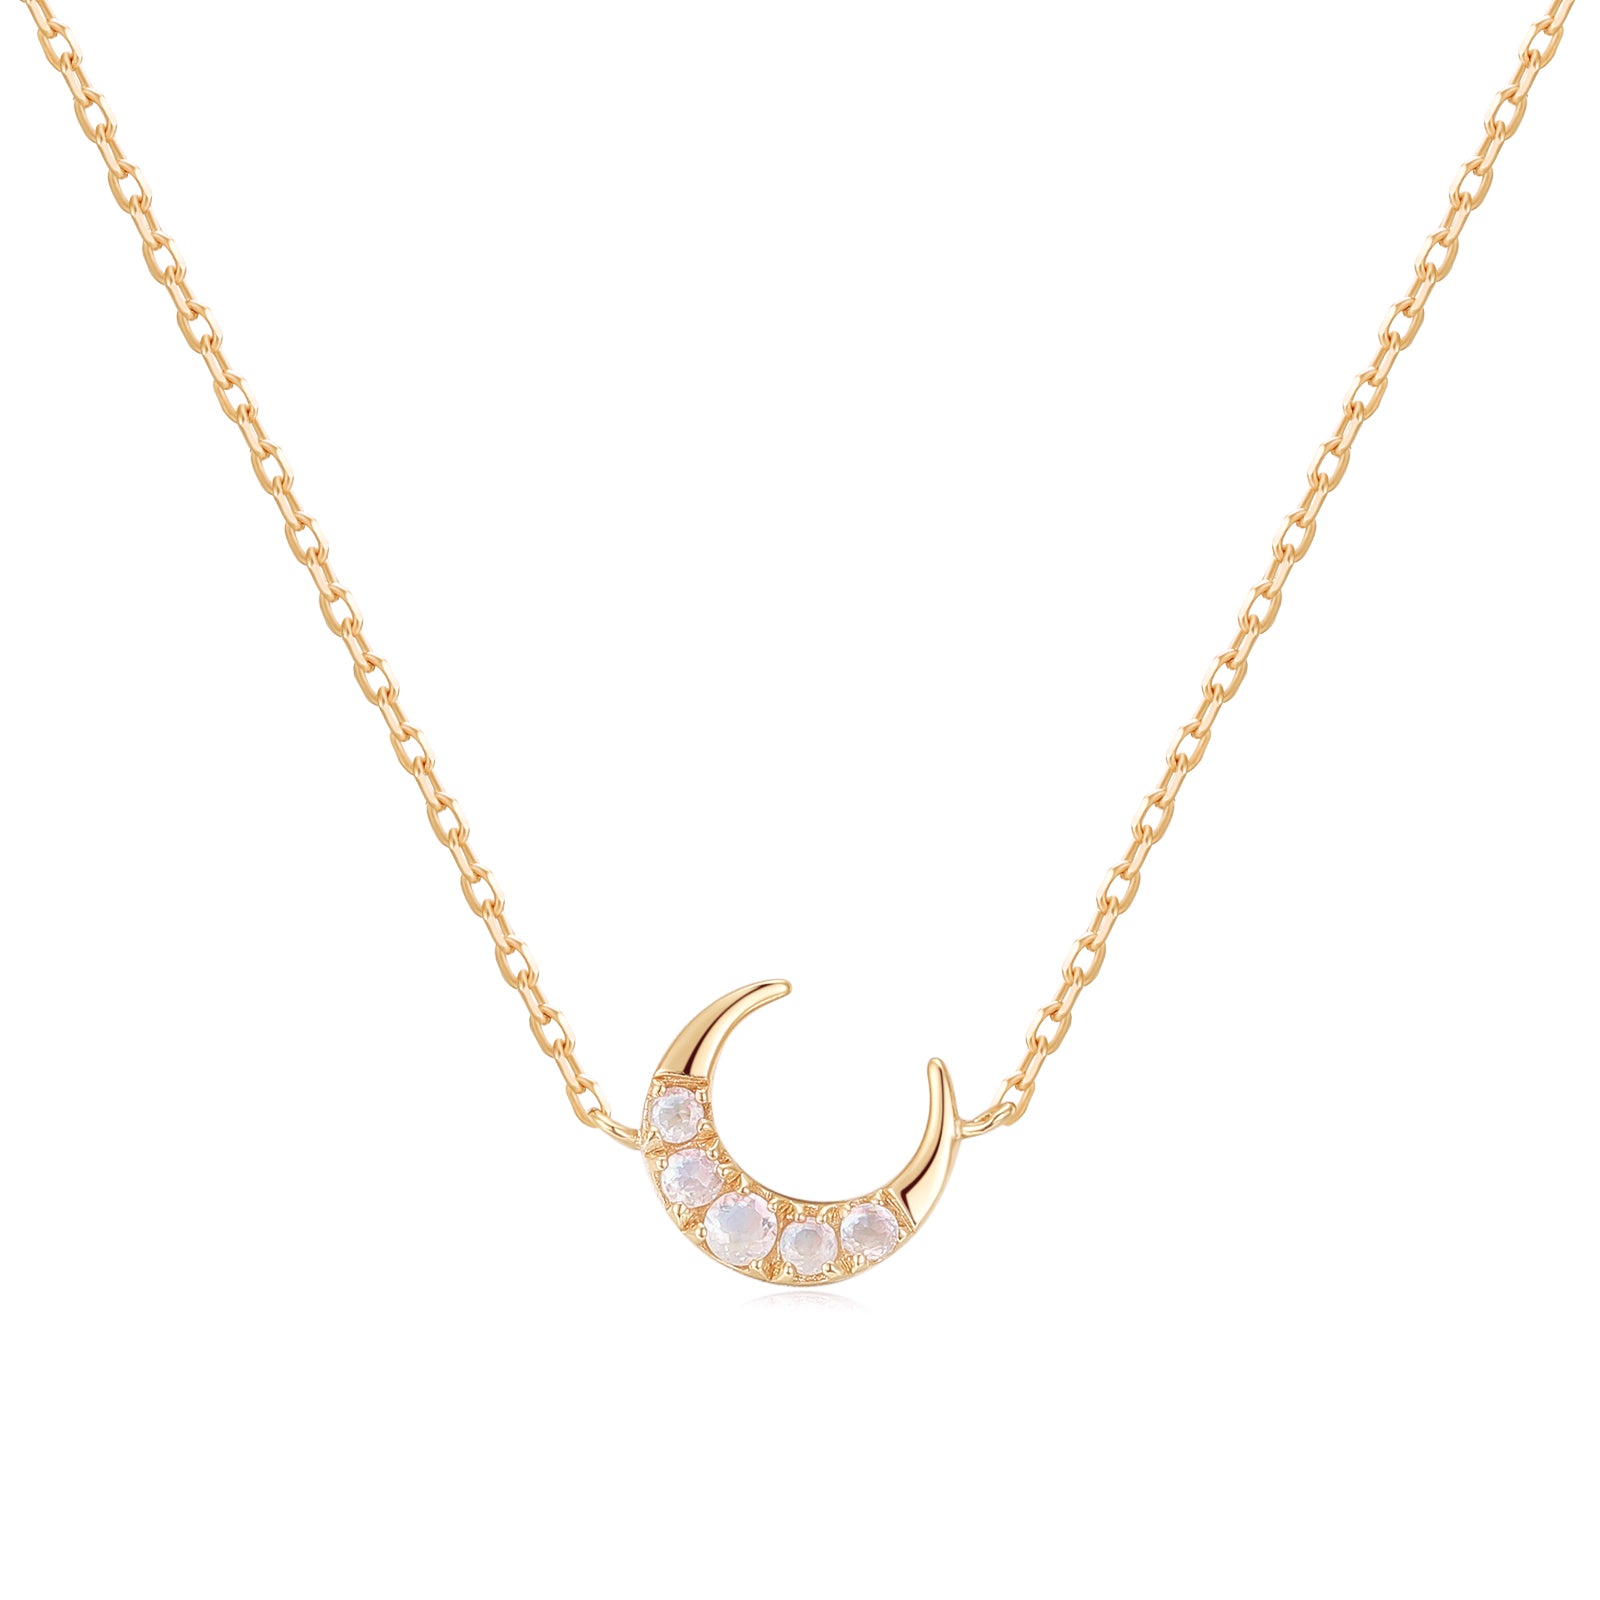 Moonstone Gold Petite Moon Necklace | LOVE BY THE MOON